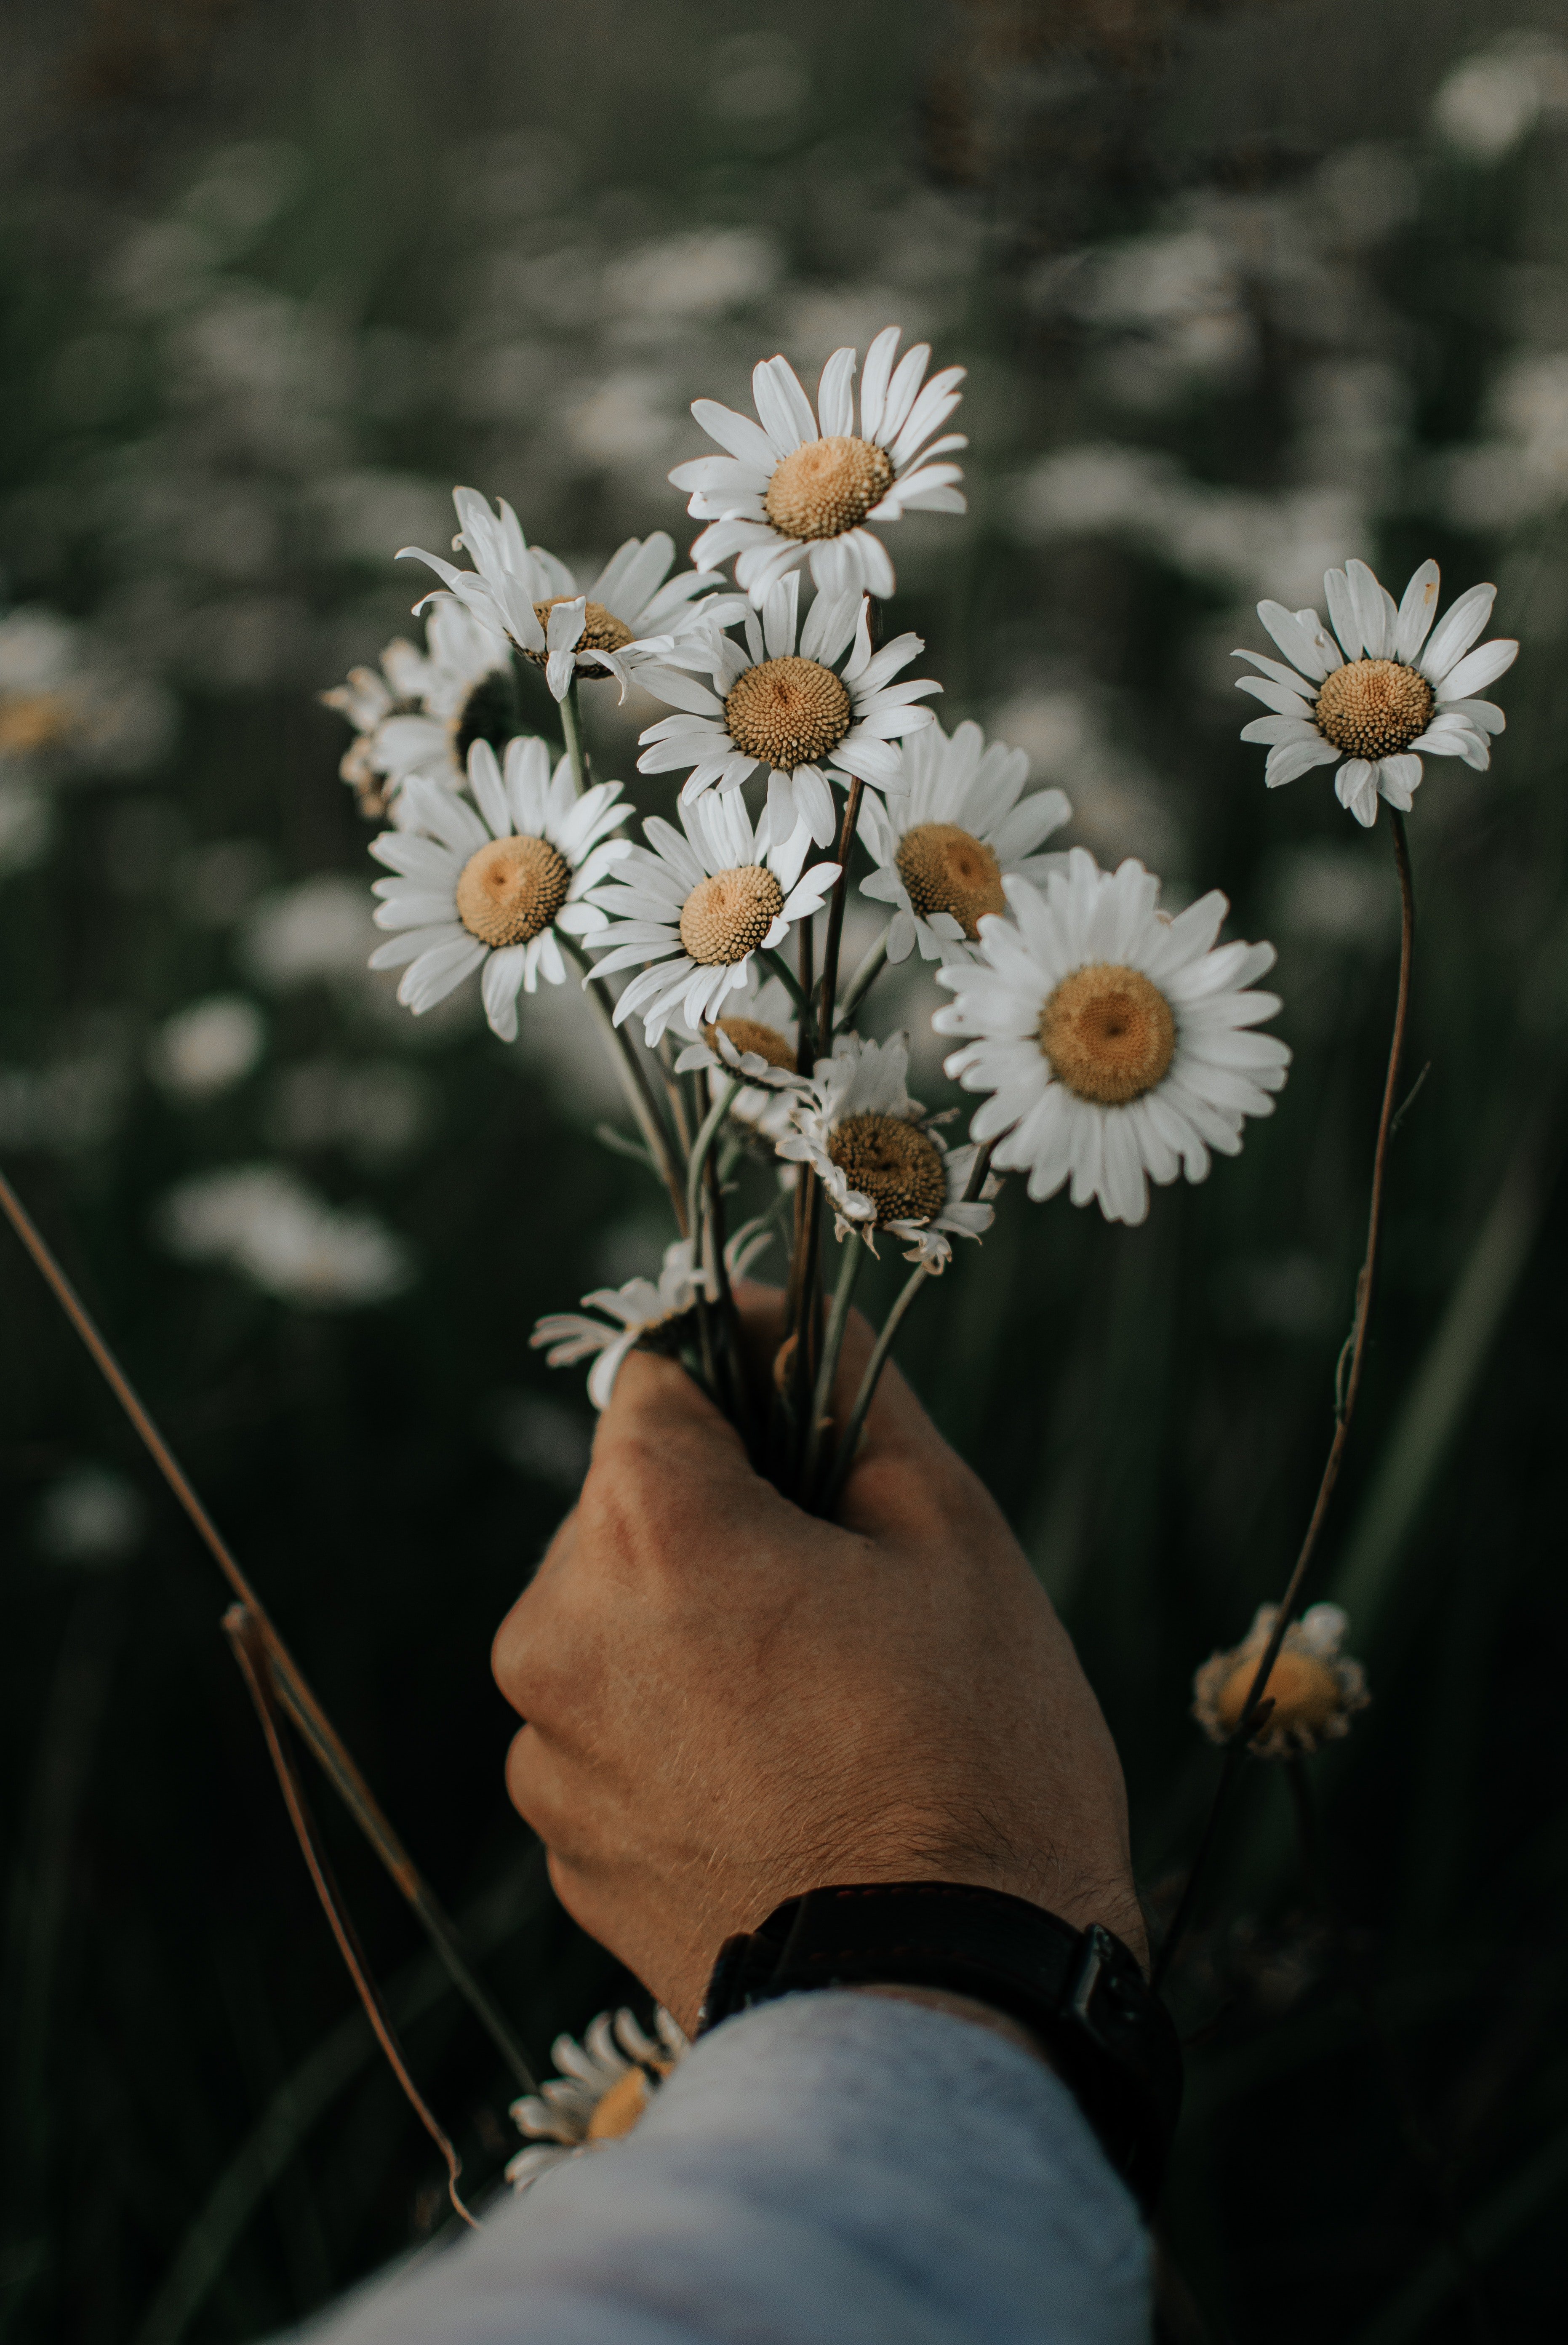 Evan bought a bouquet of daisies from the older woman. | Source: Pexels